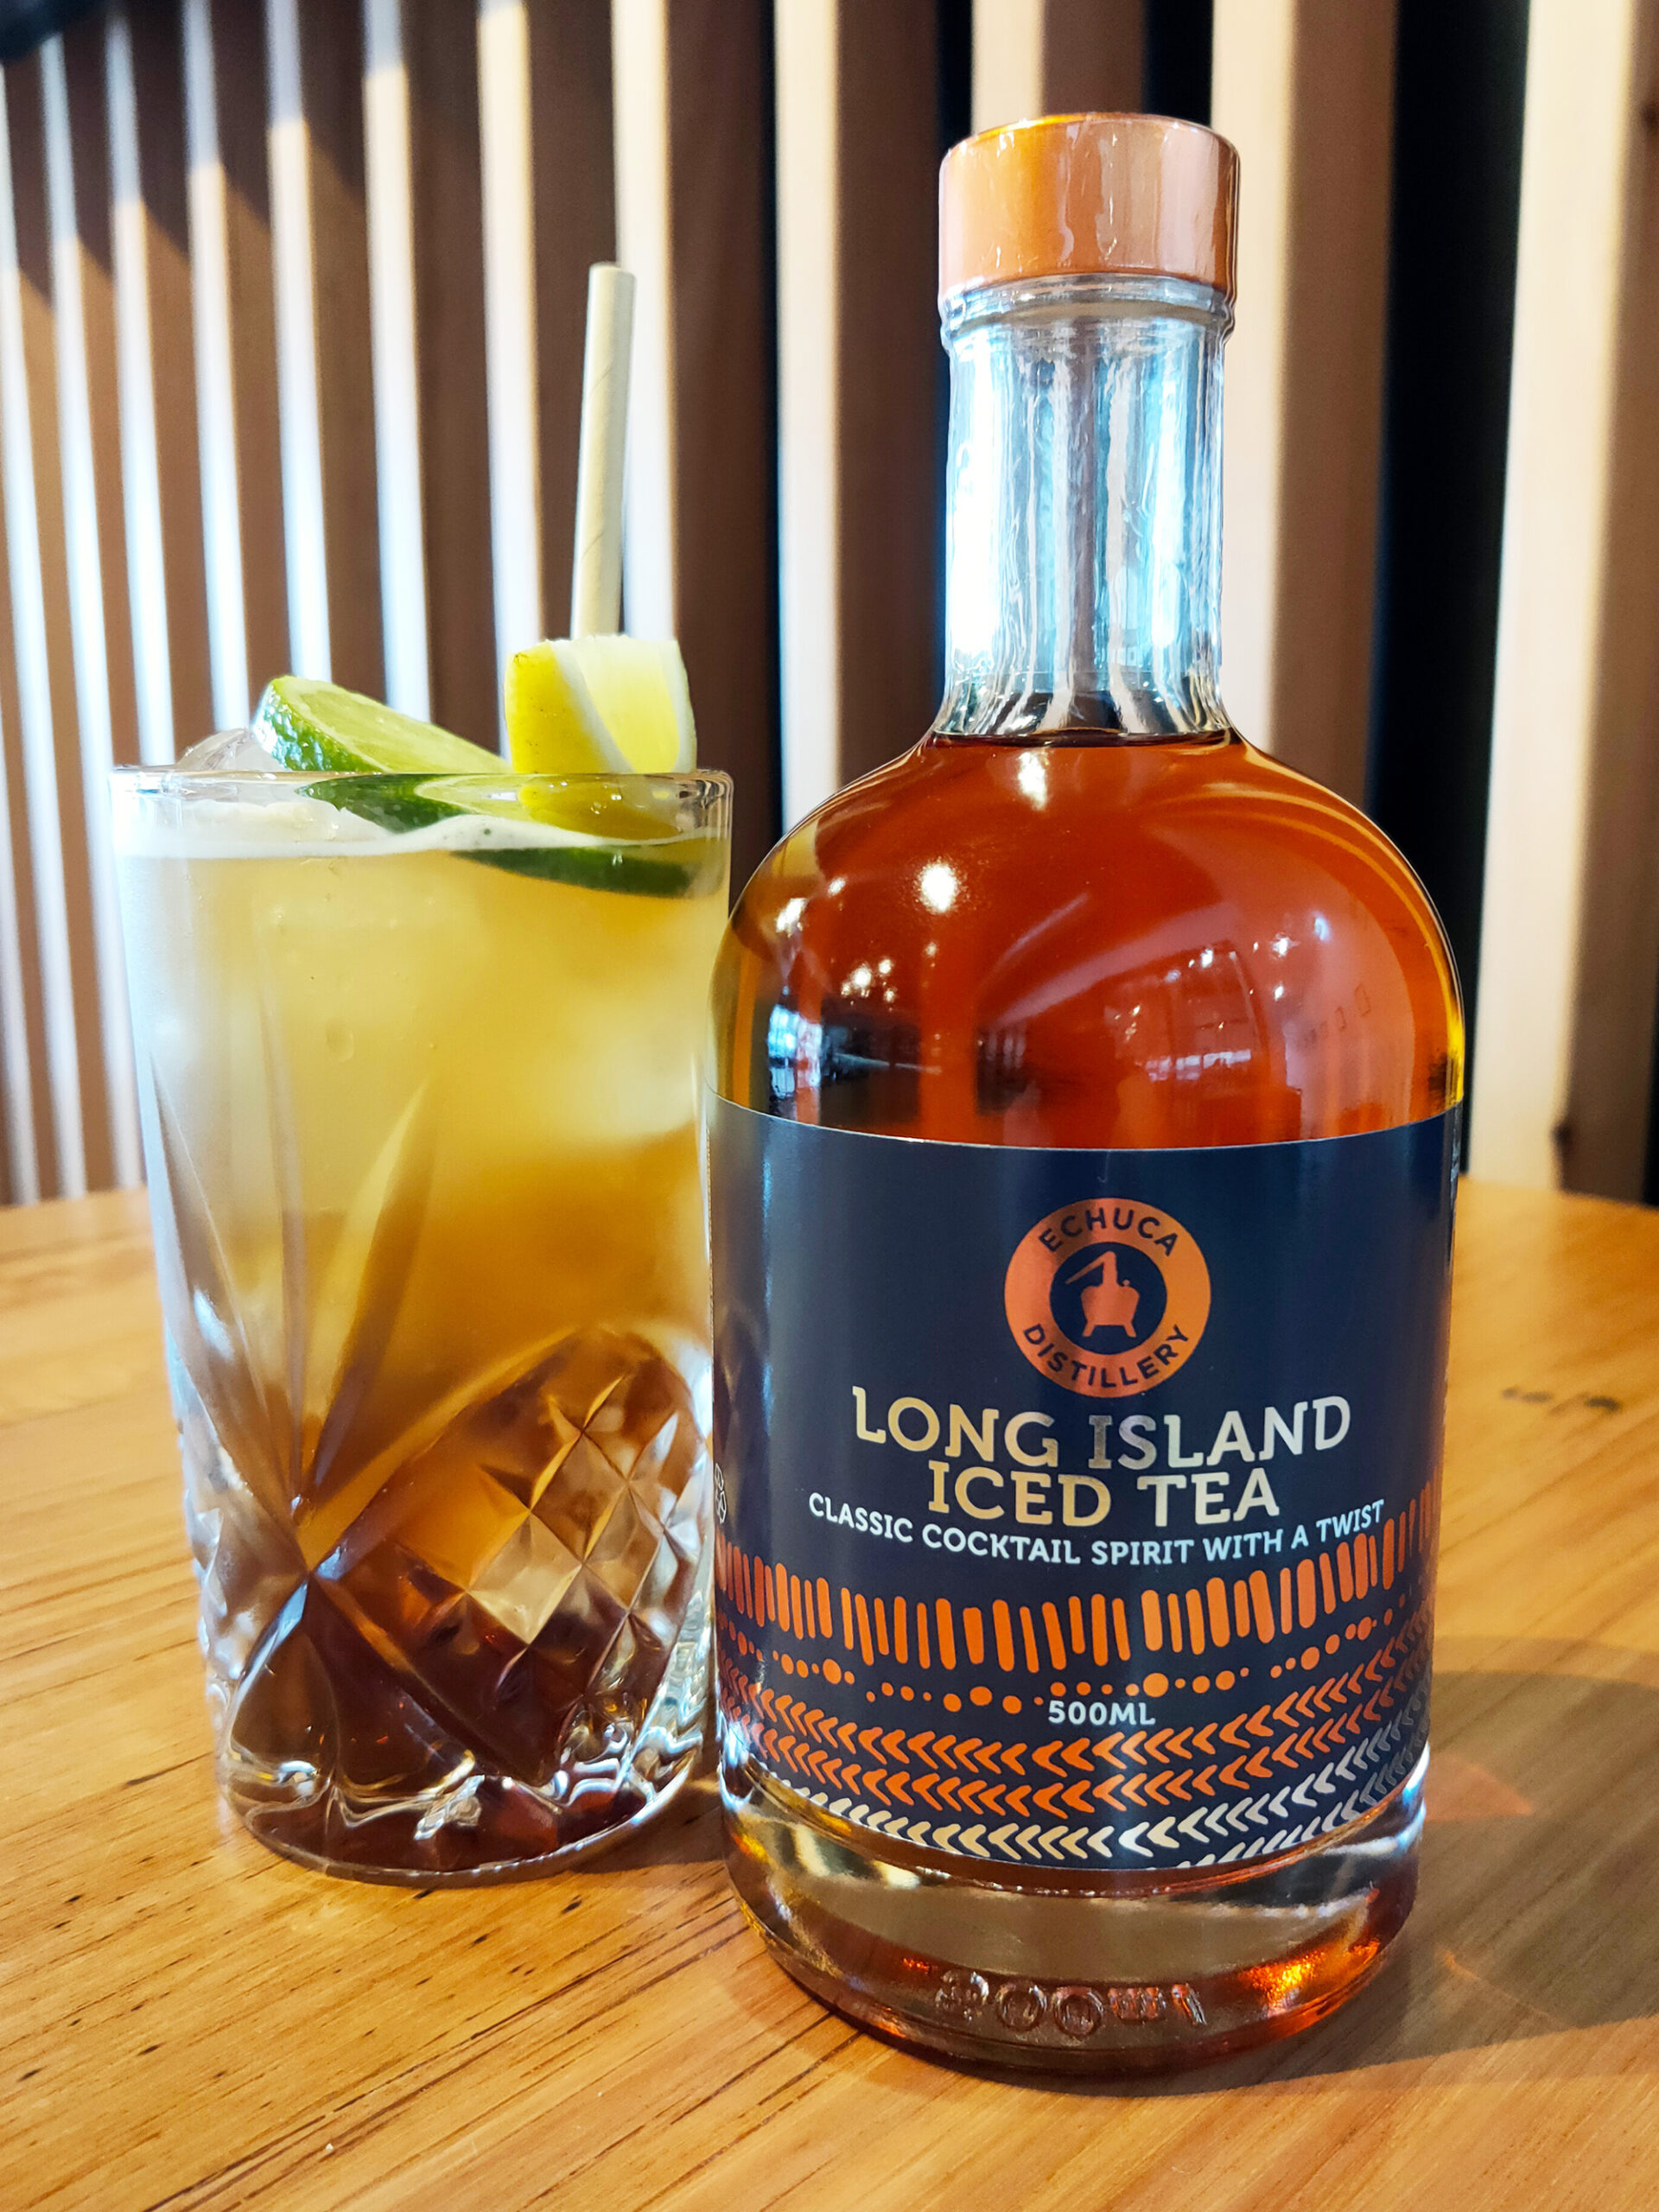 Long Island Iced Tea Cocktail Gift Set with Gin, Vodka, Tequila